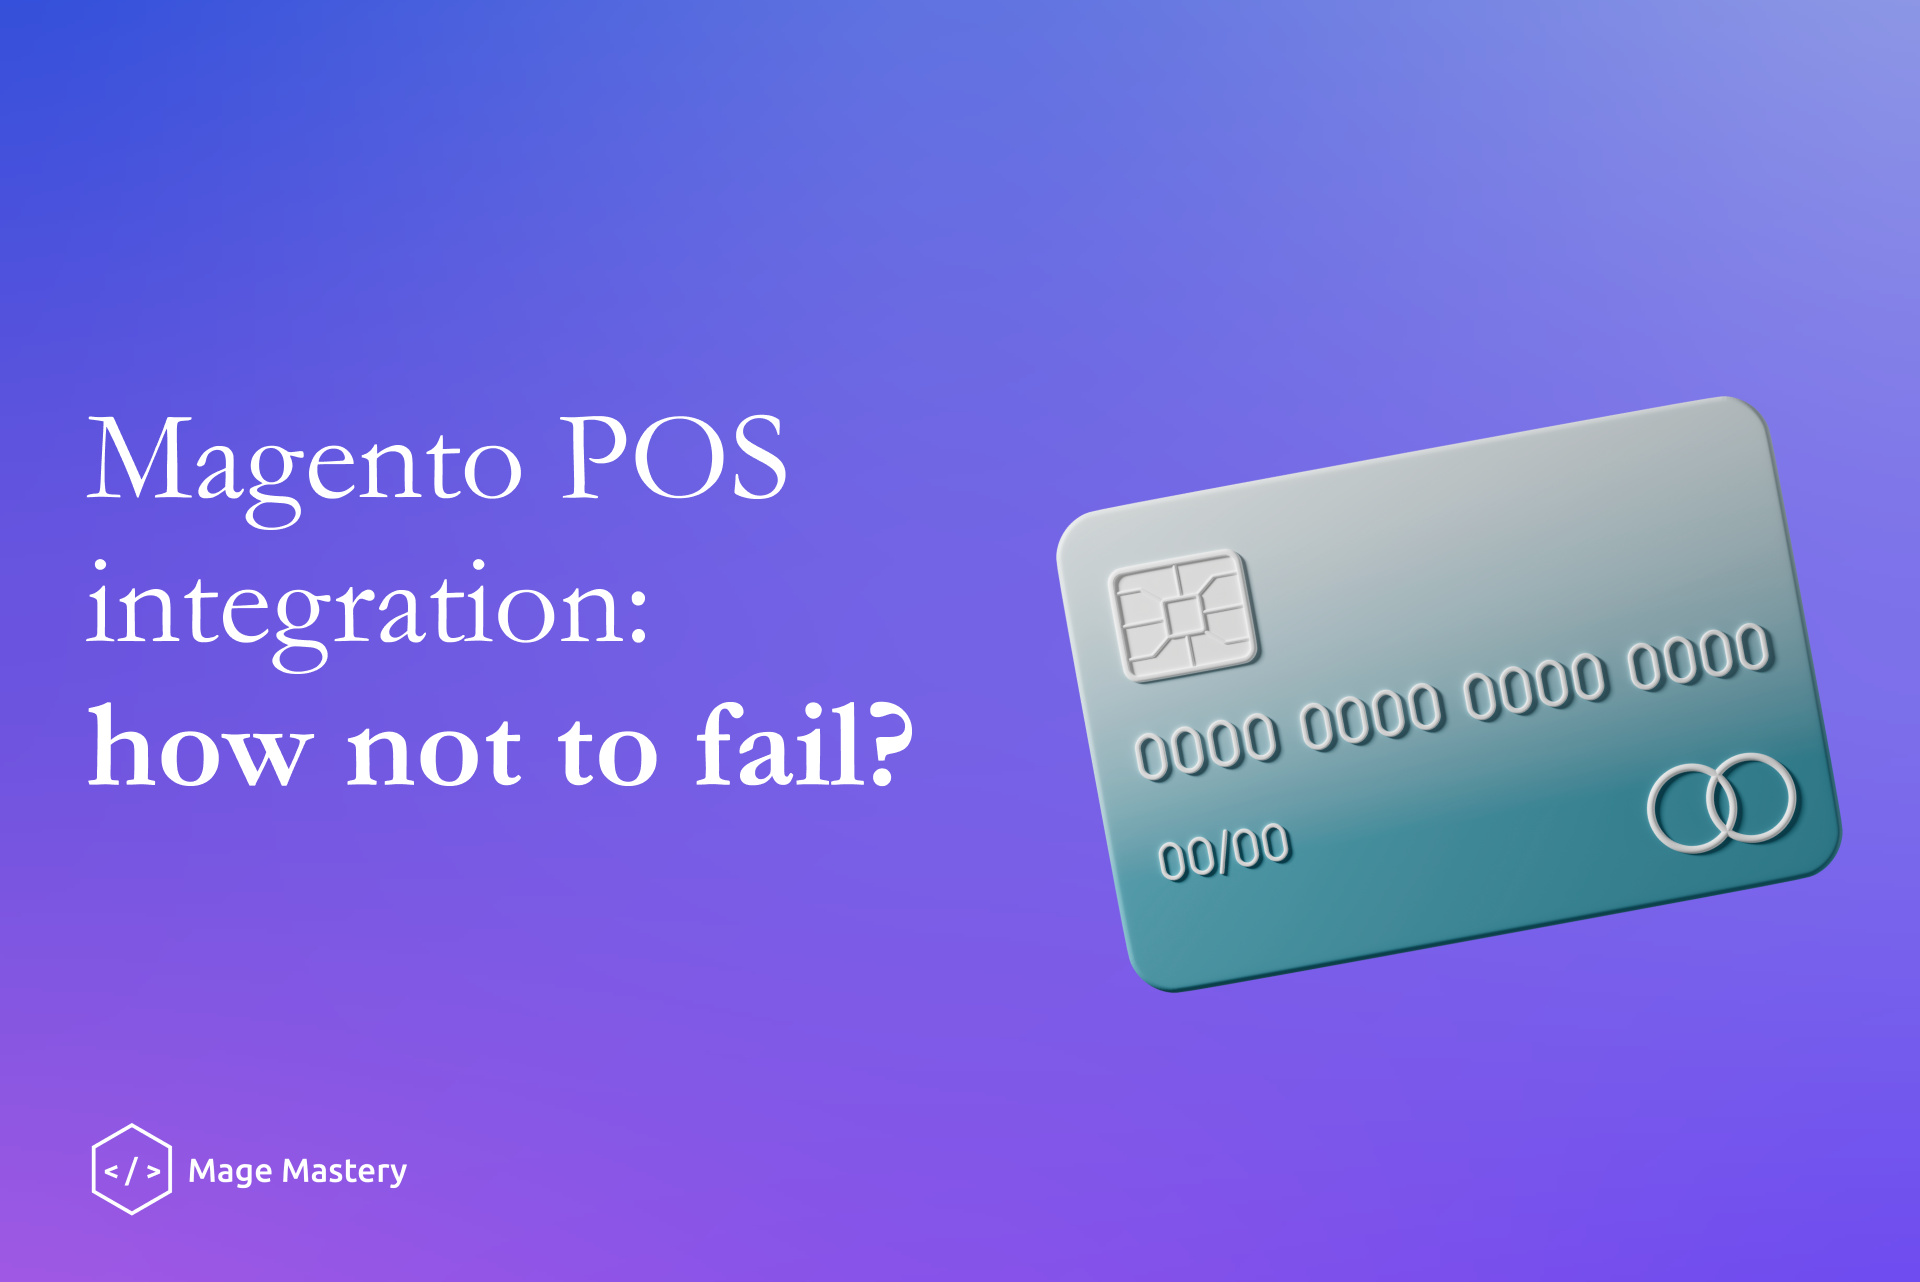 Magento POS integration for your business: learn how to improve